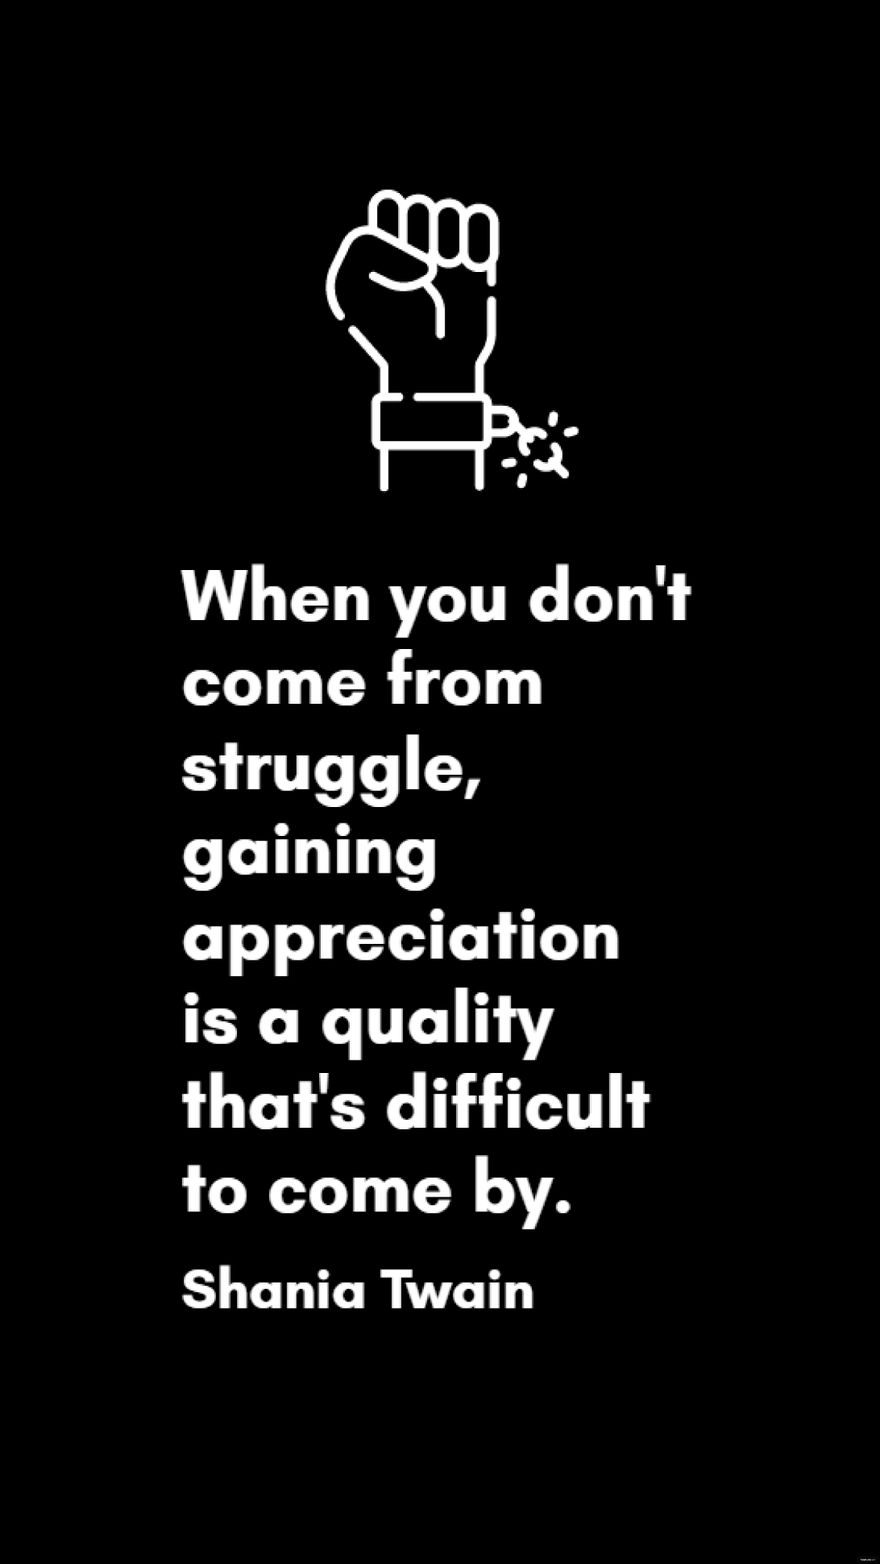 Shania Twain - When you don't come from struggle, gaining appreciation is a quality that's difficult to come by.